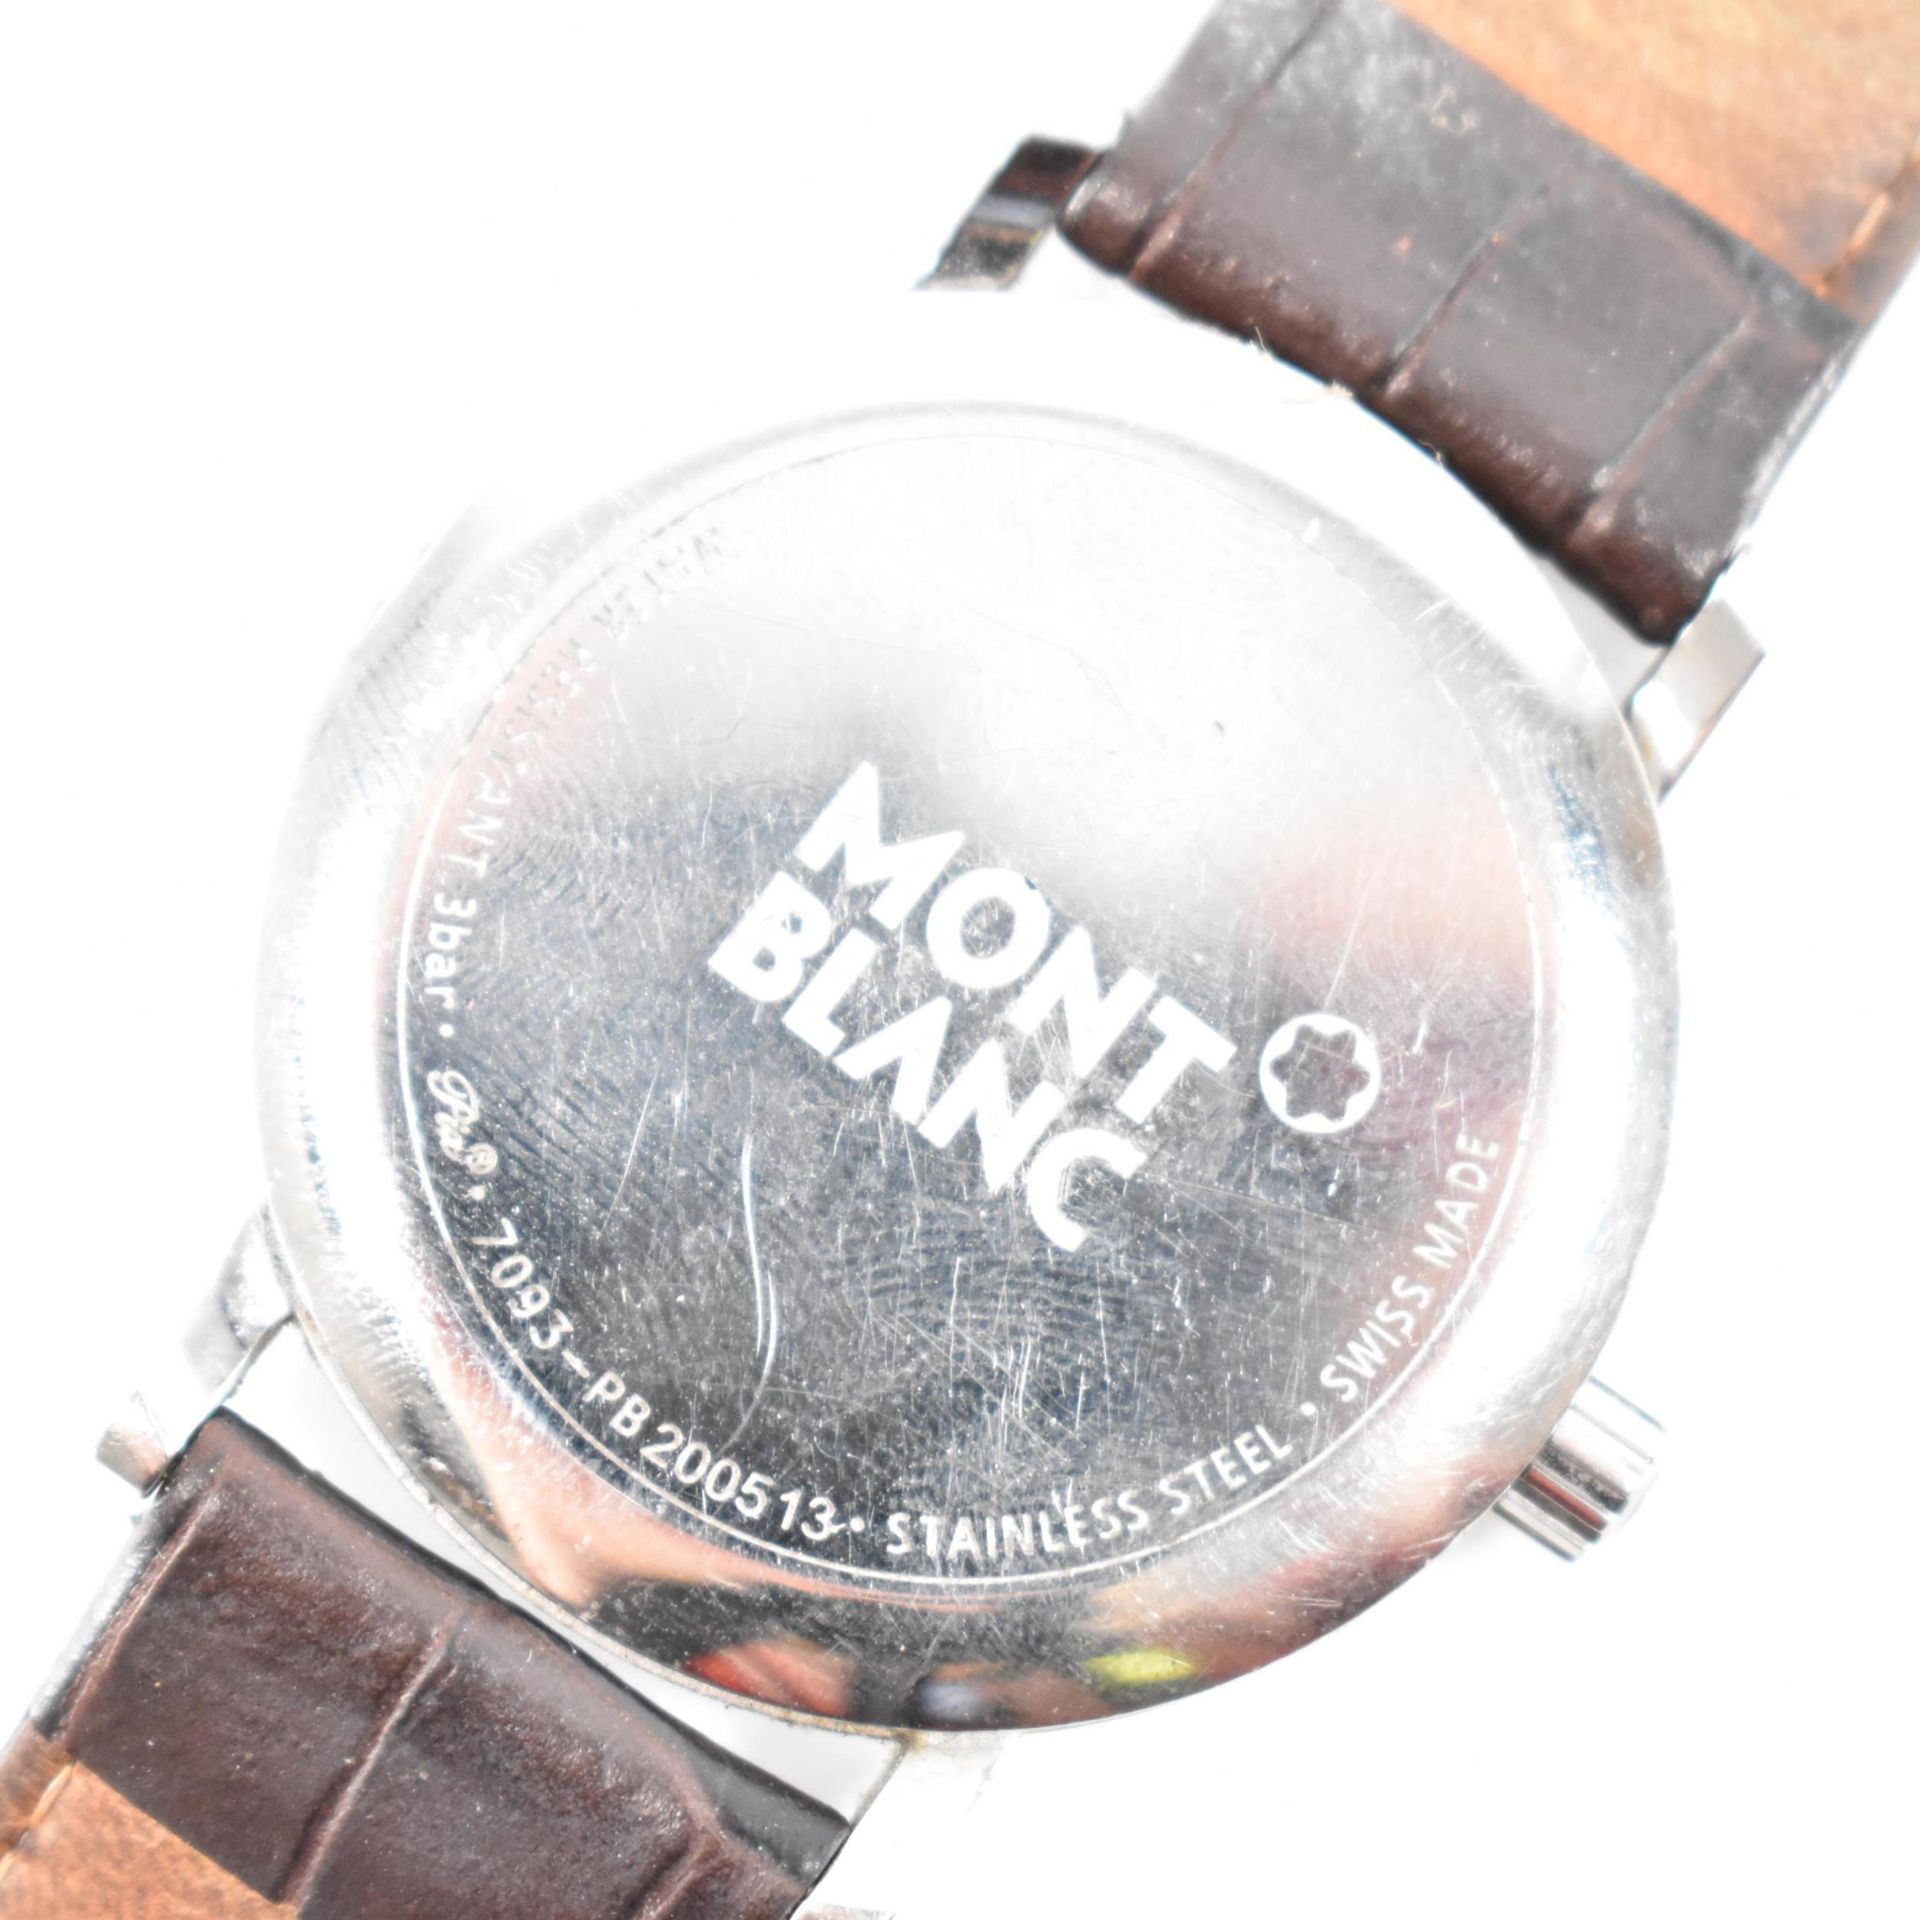 MONTBLANC WATER RESISTANT STAINLESS STEEL WATCH - Image 5 of 7